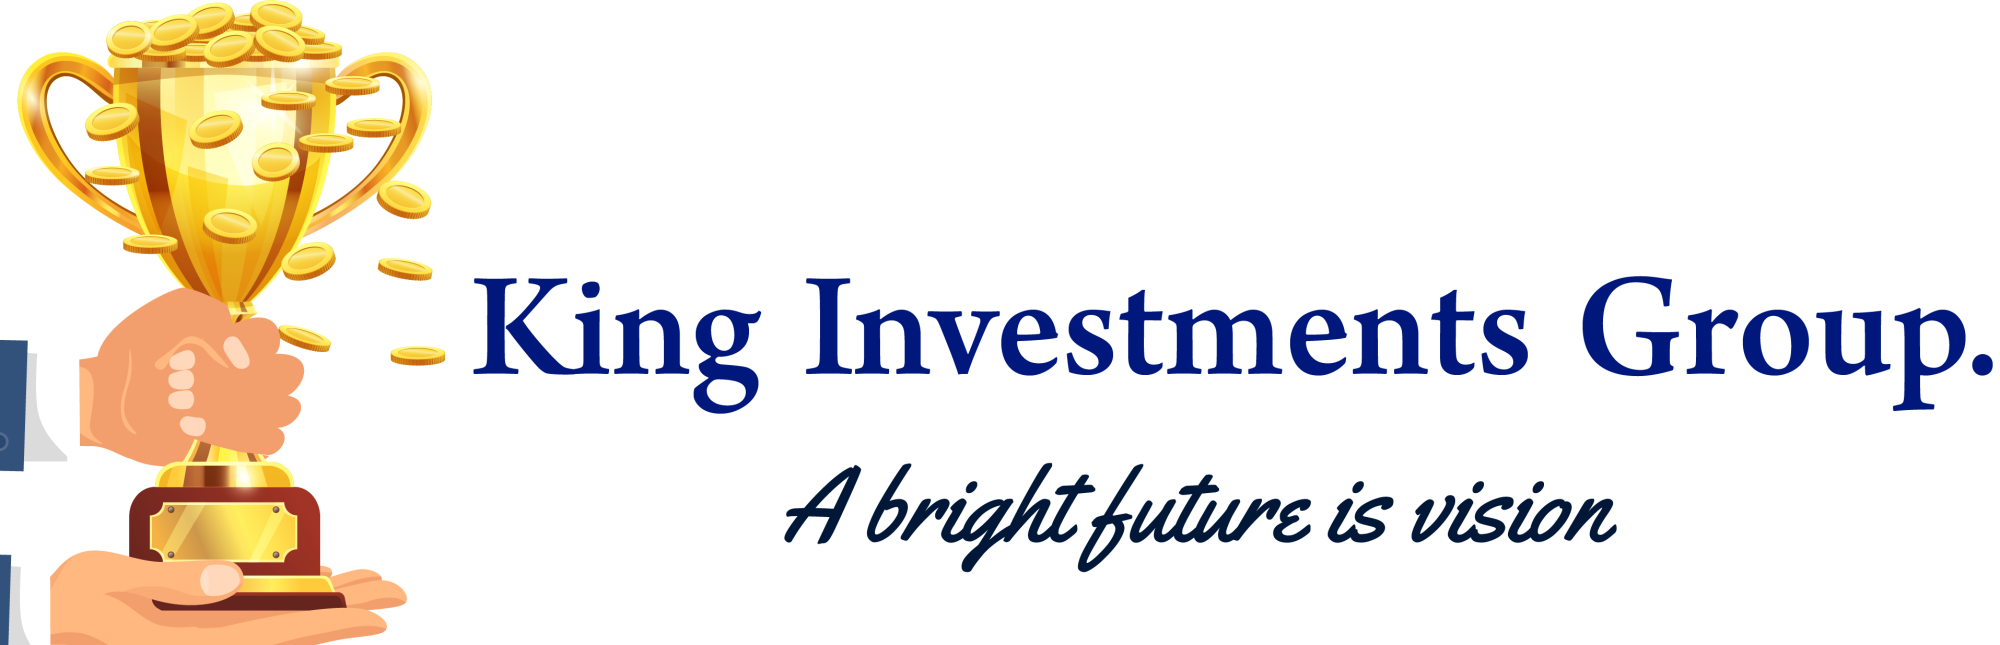 KING INVESTMENTS GROUP